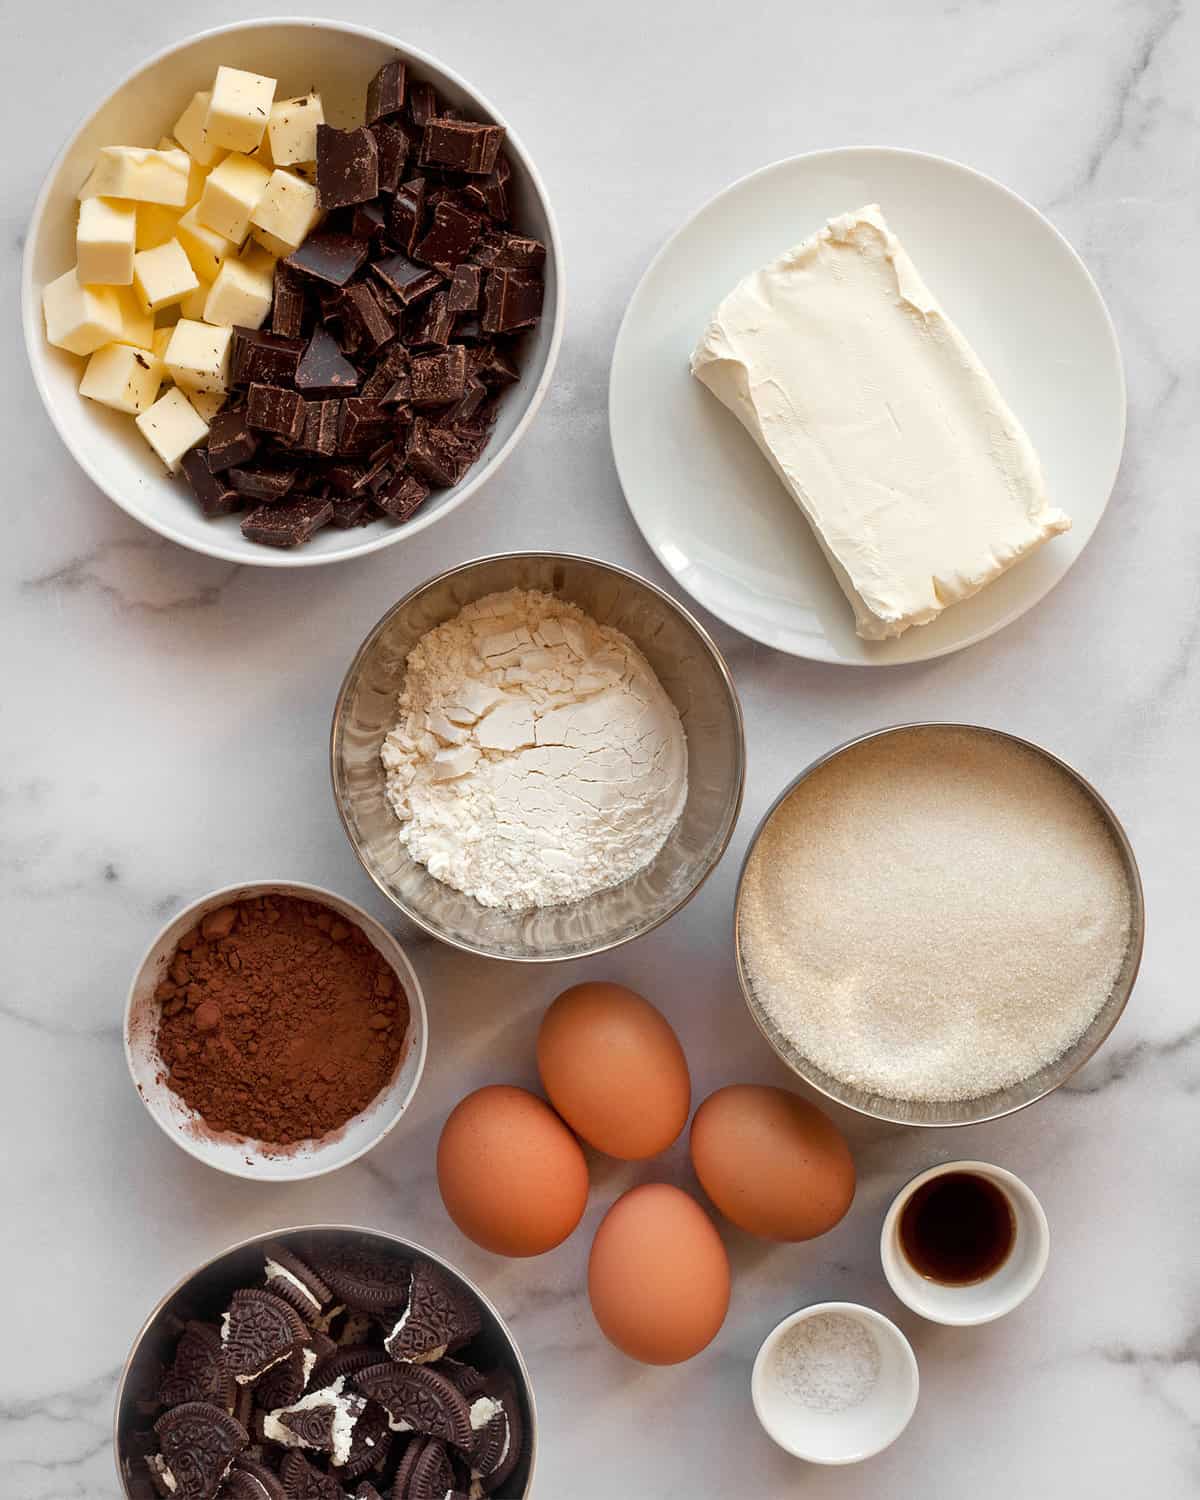 Ingredients including chocolate, cocoa powder, sugar, flour, butter, cream cheese, eggs and salt.